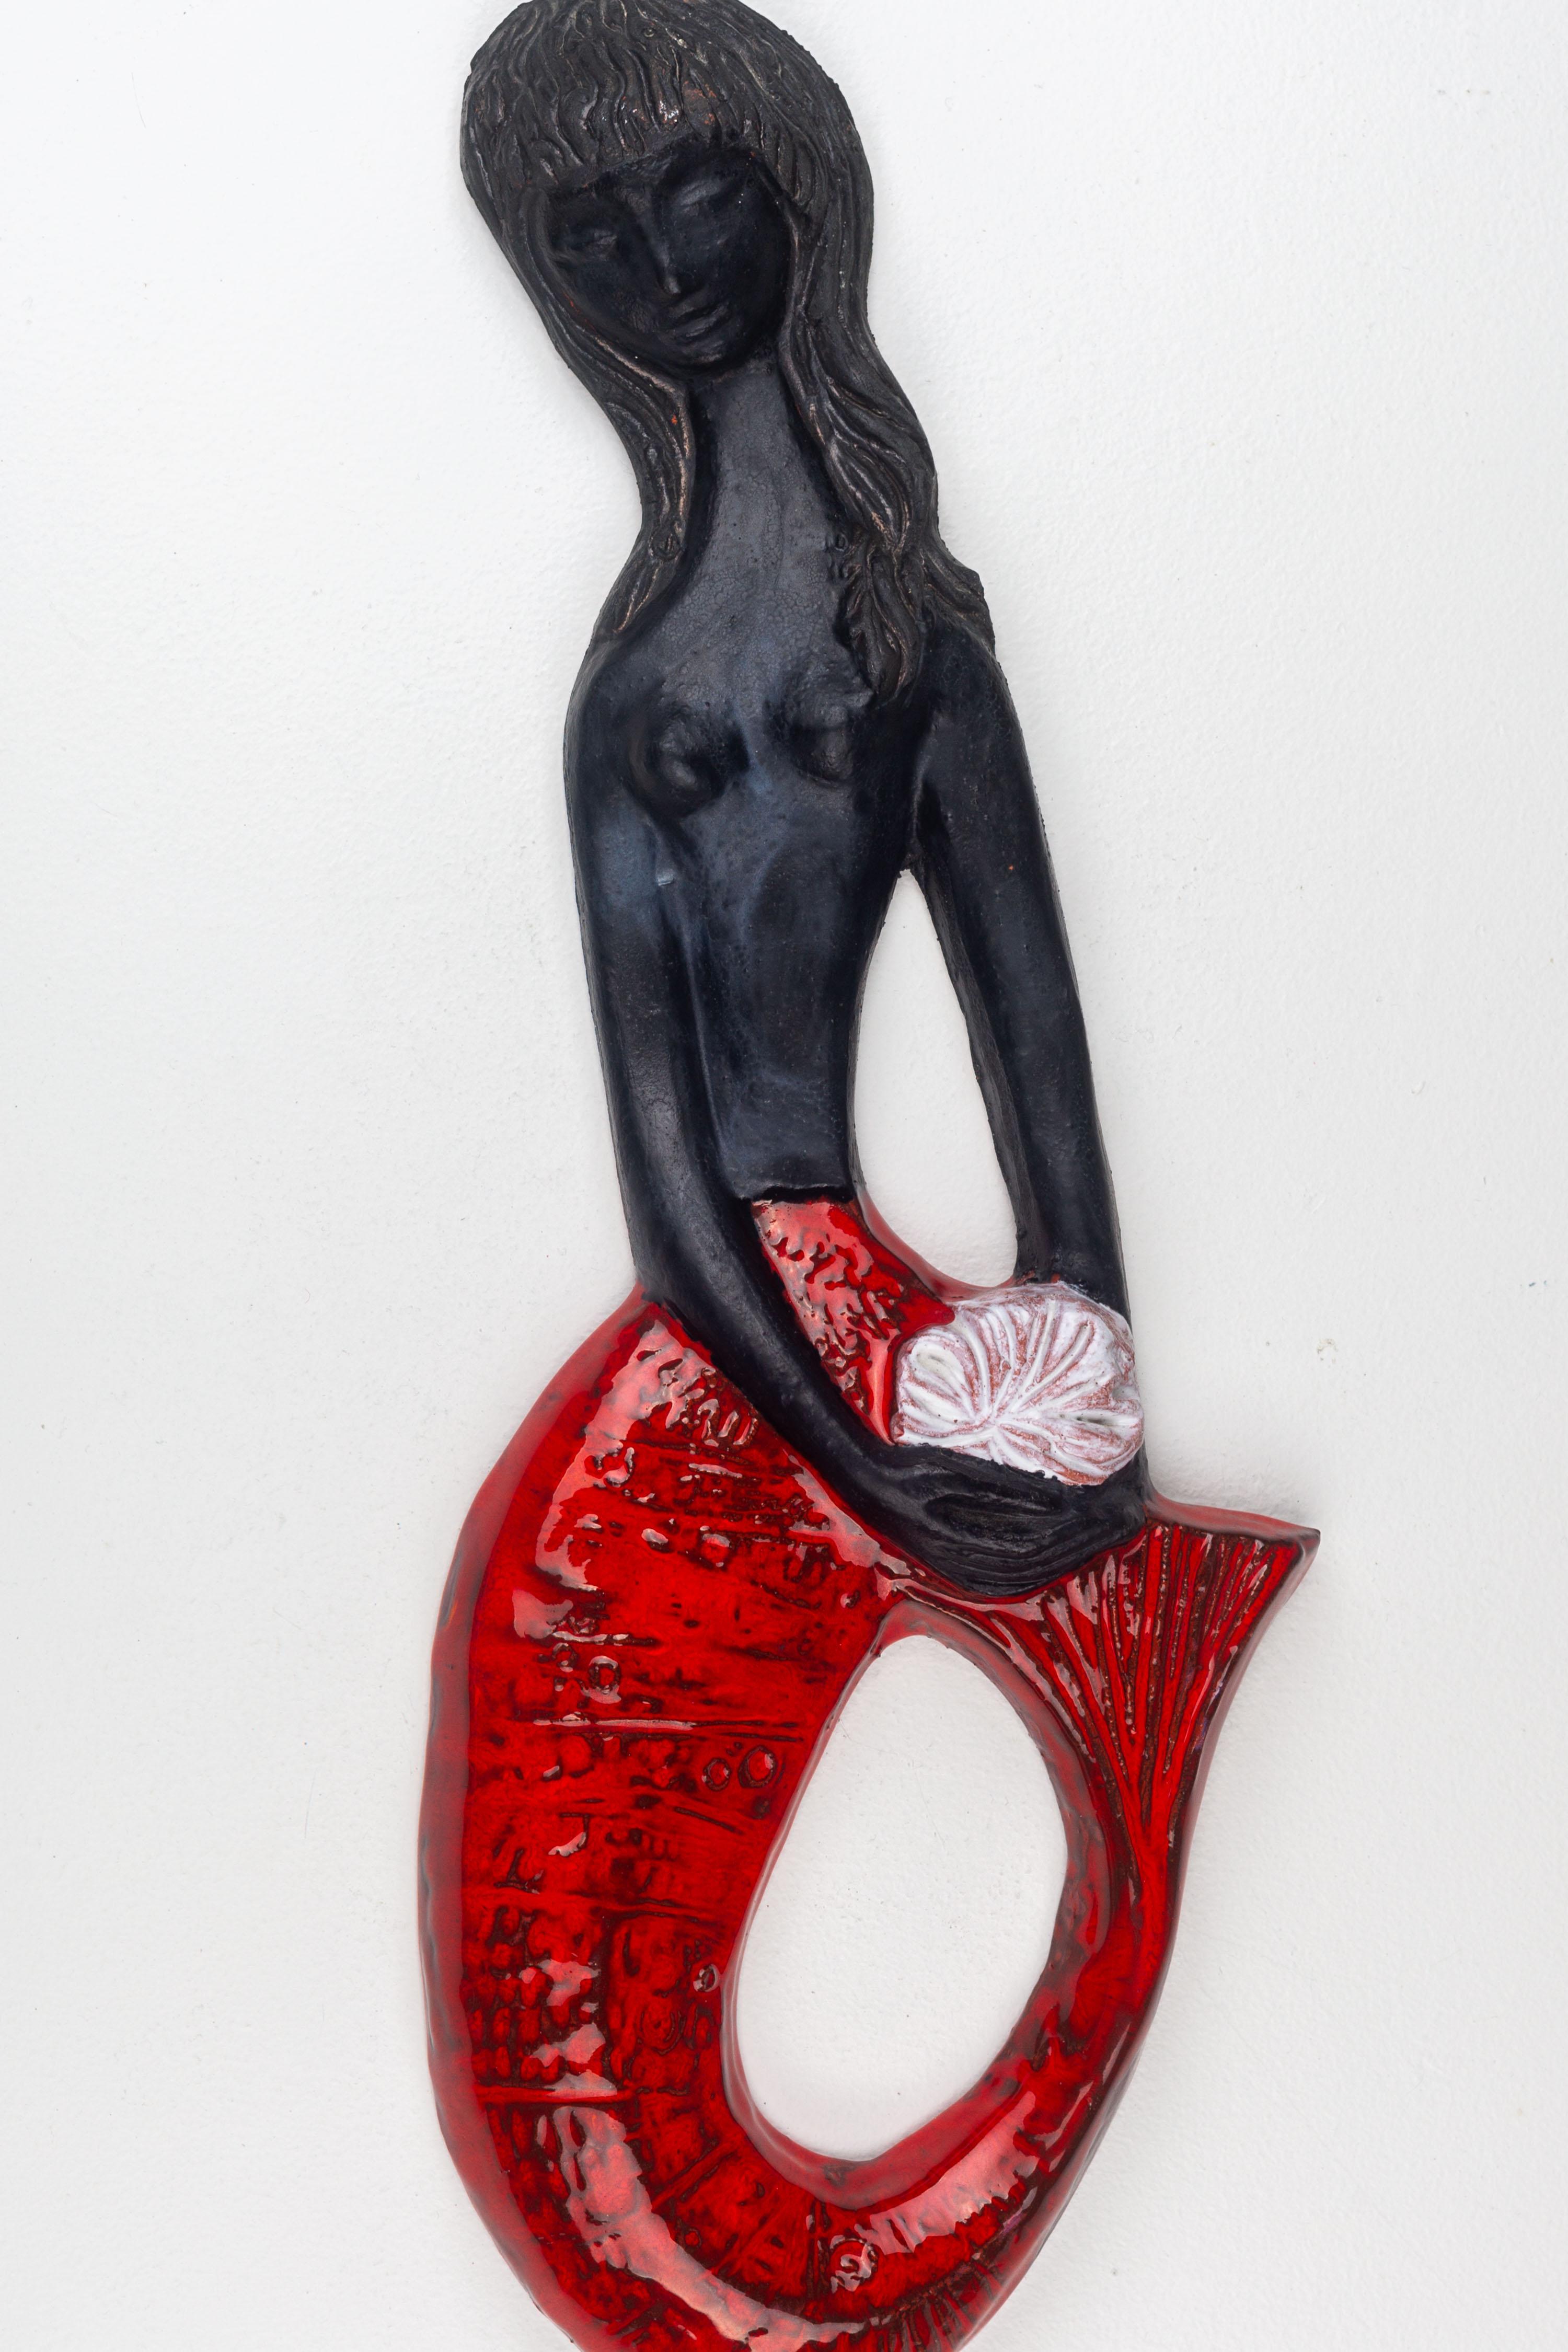 Midcentury European Mermaid Ceramic Wall Art, Black and Red, 1960s For Sale 6